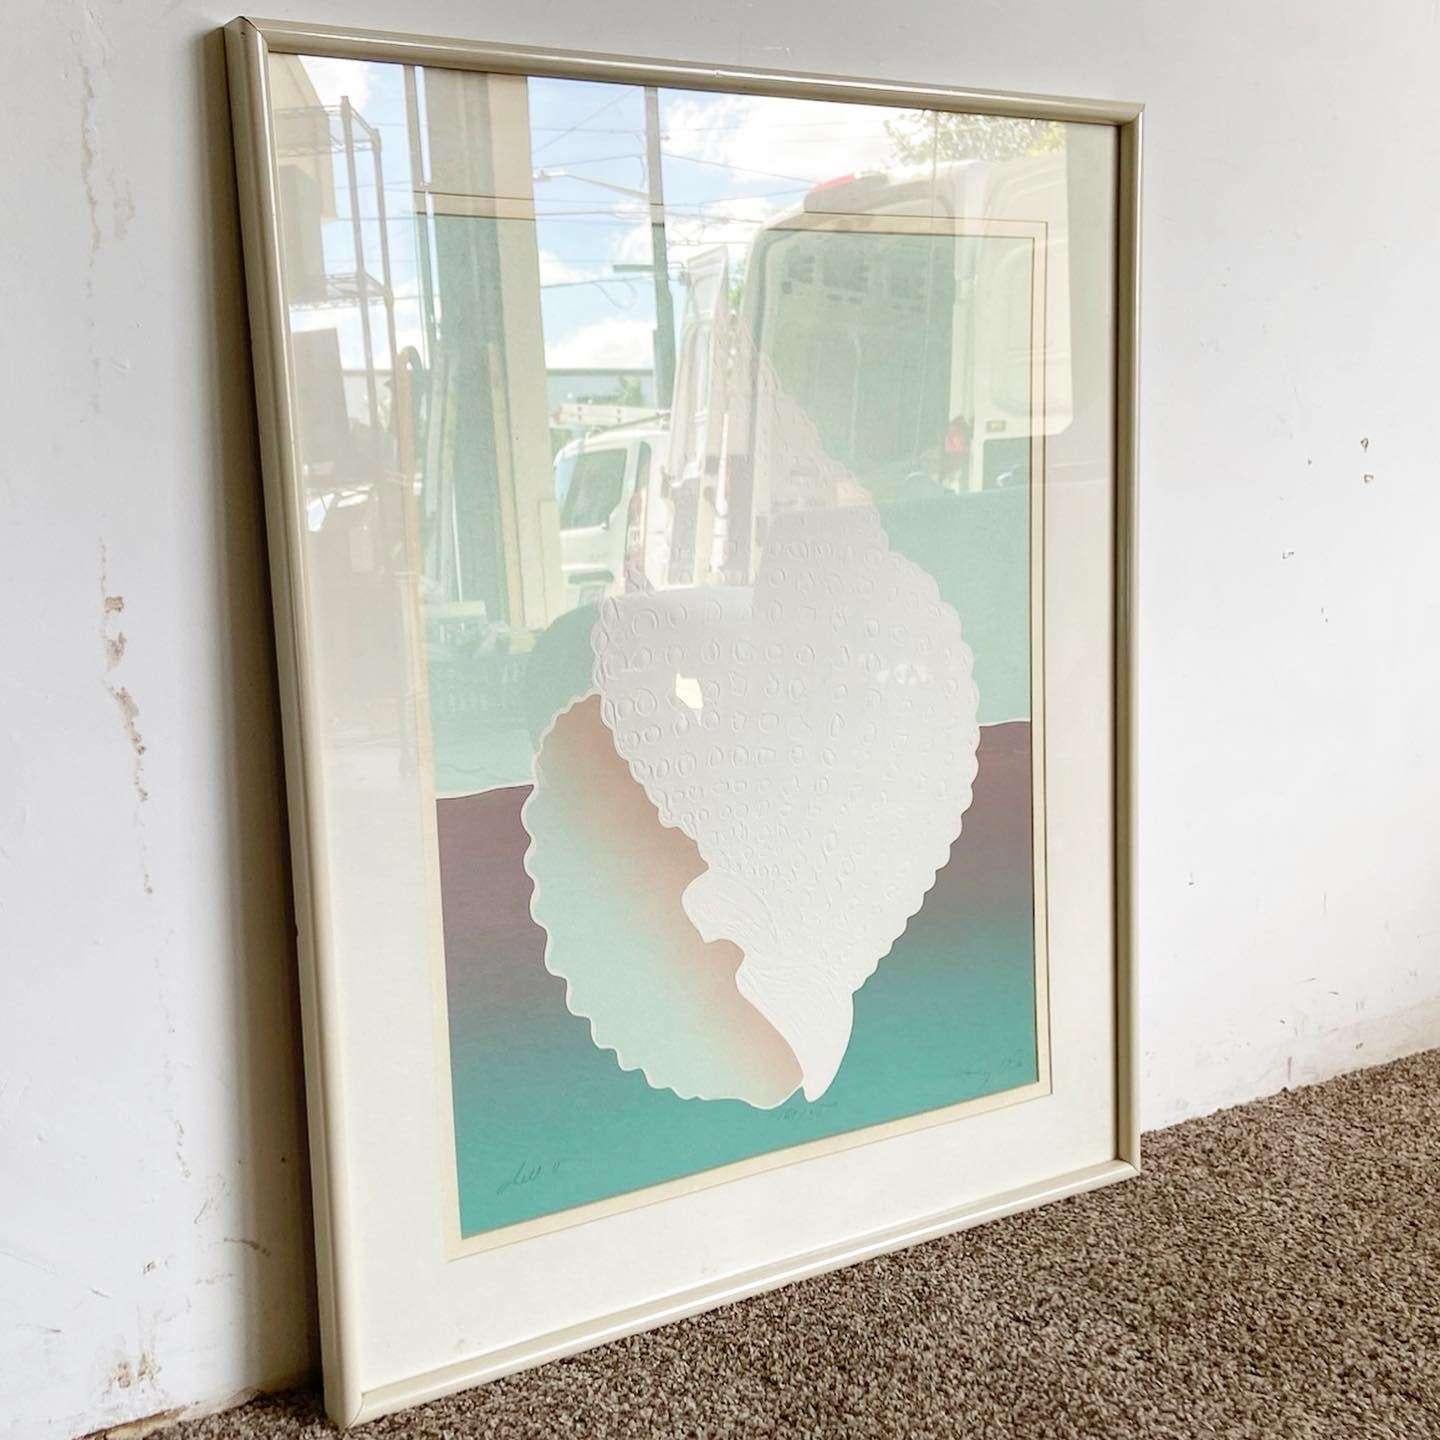 Excellent vintage postmodern framed and signed lithograph titles “Shell”. Displays a brilliant blue and light brown design centering a conch shell.